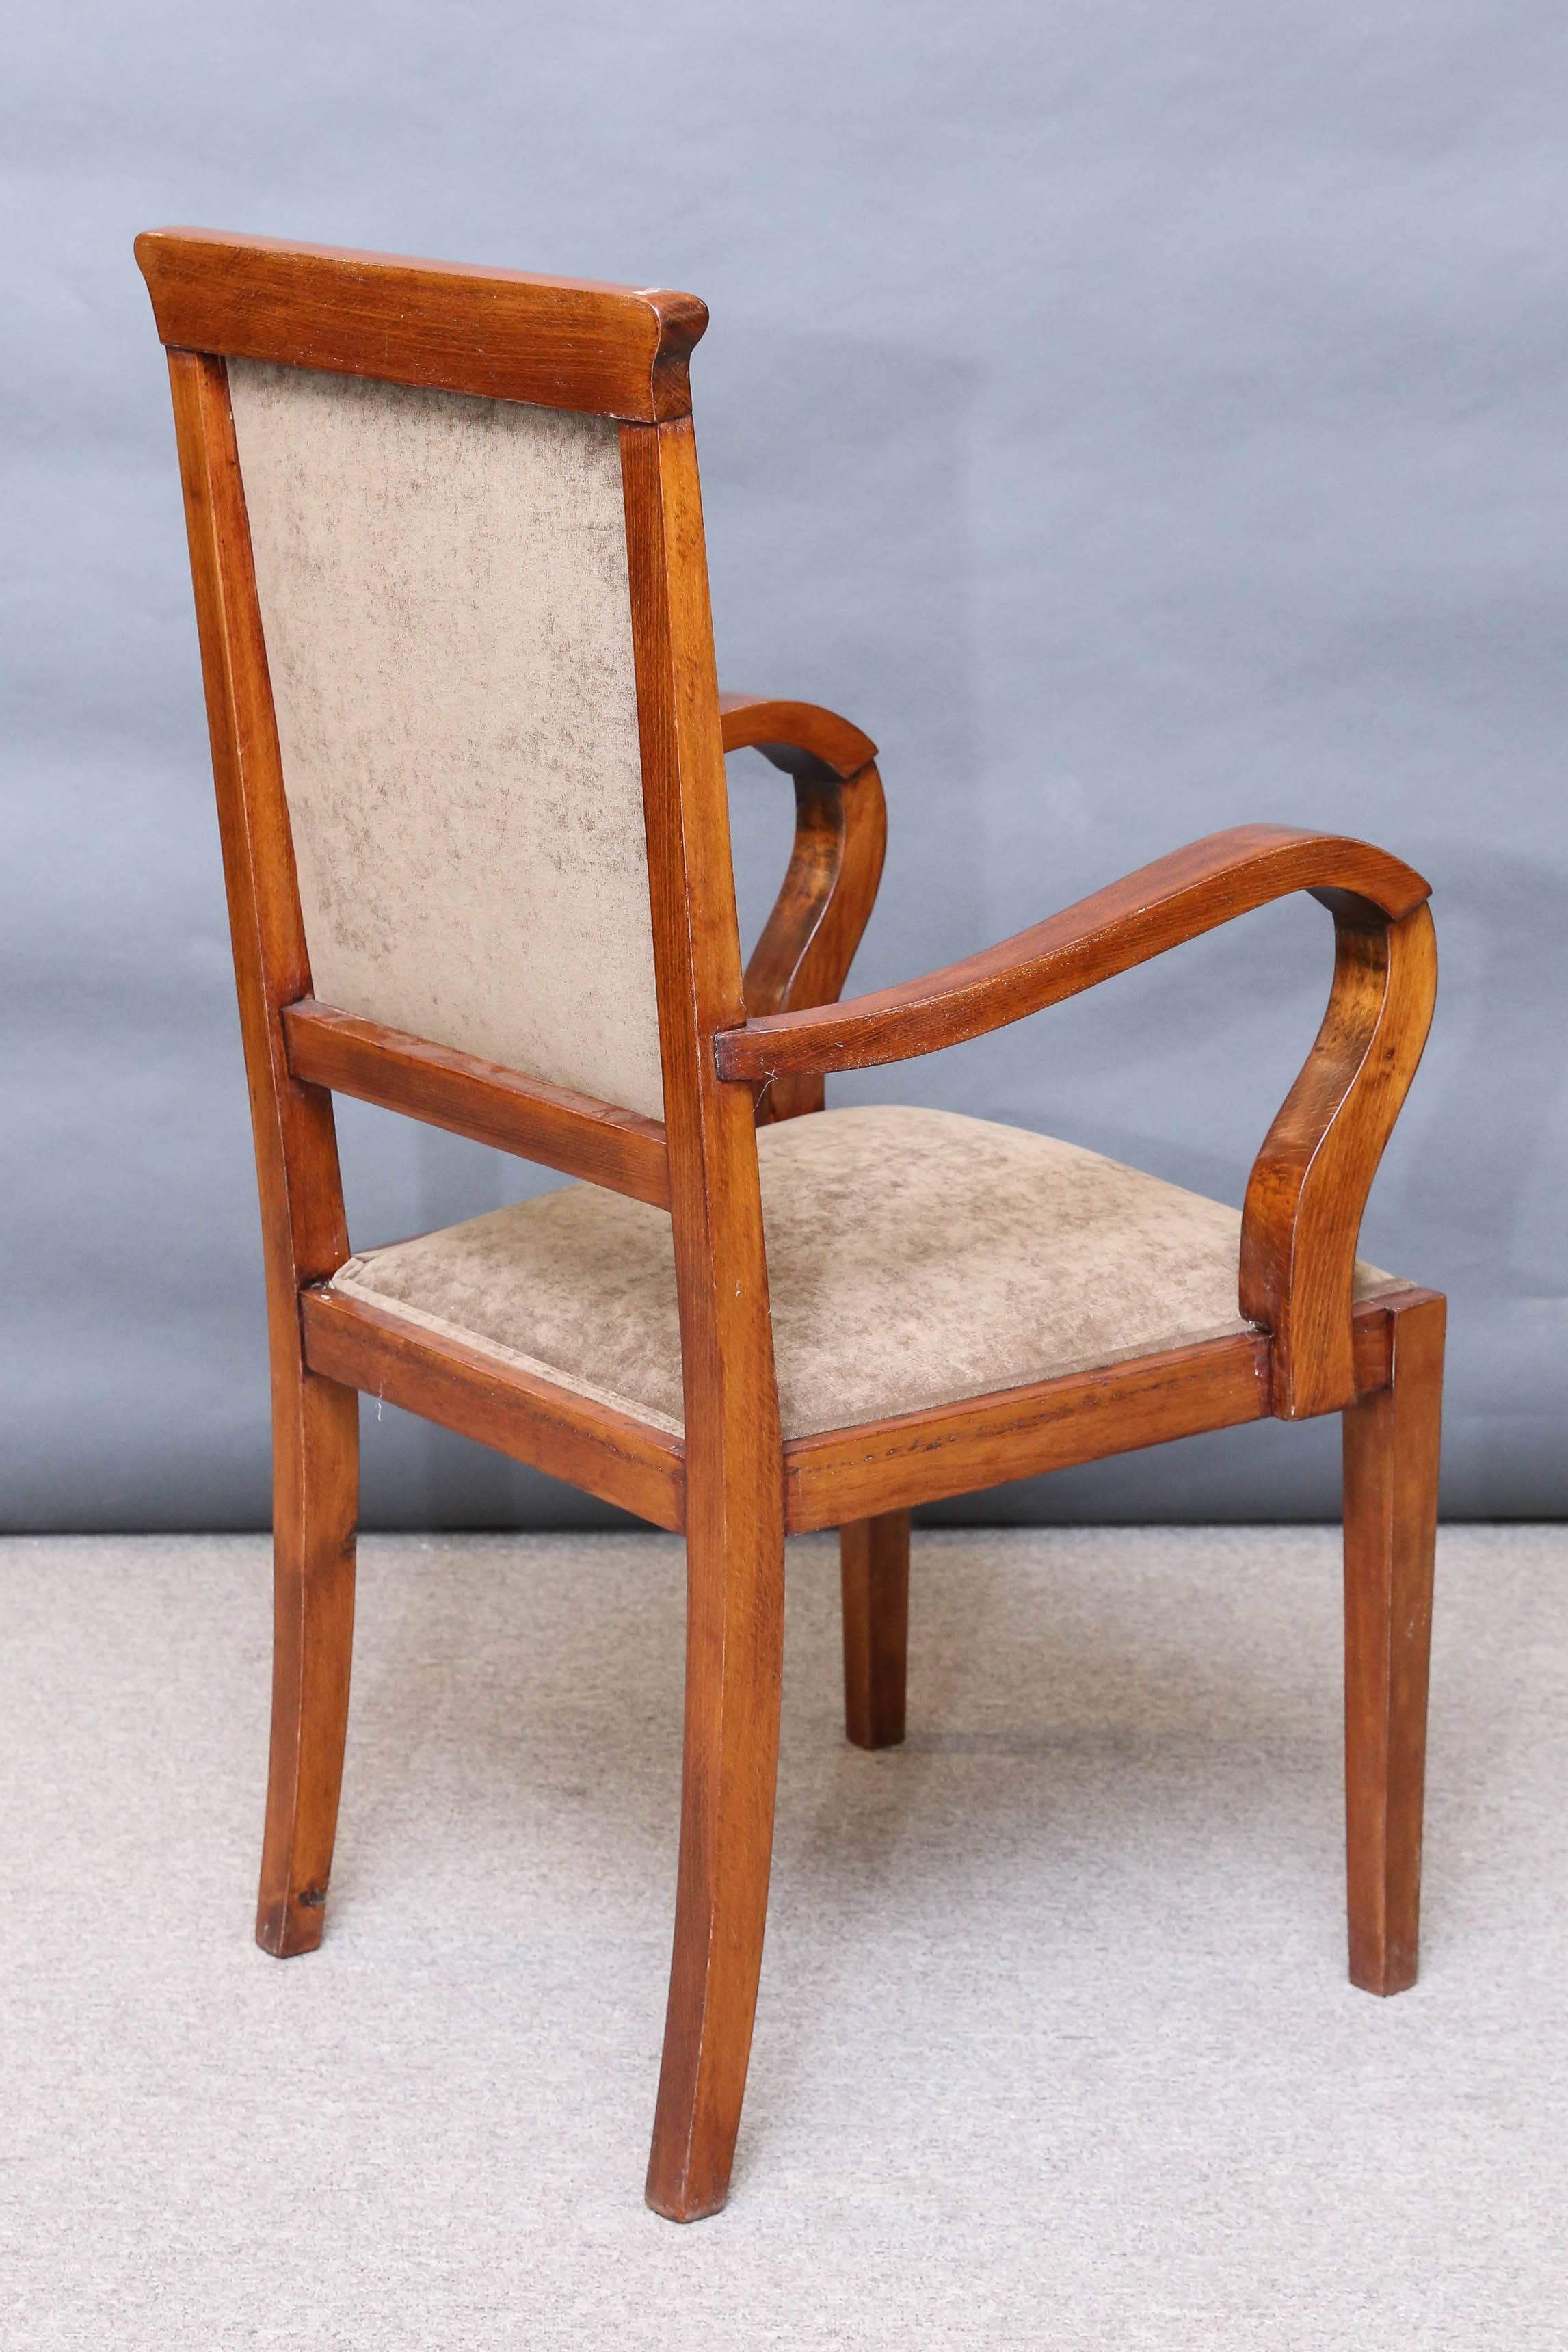 Mid-20th Century Hungarian Art Deco Chair in Walnut